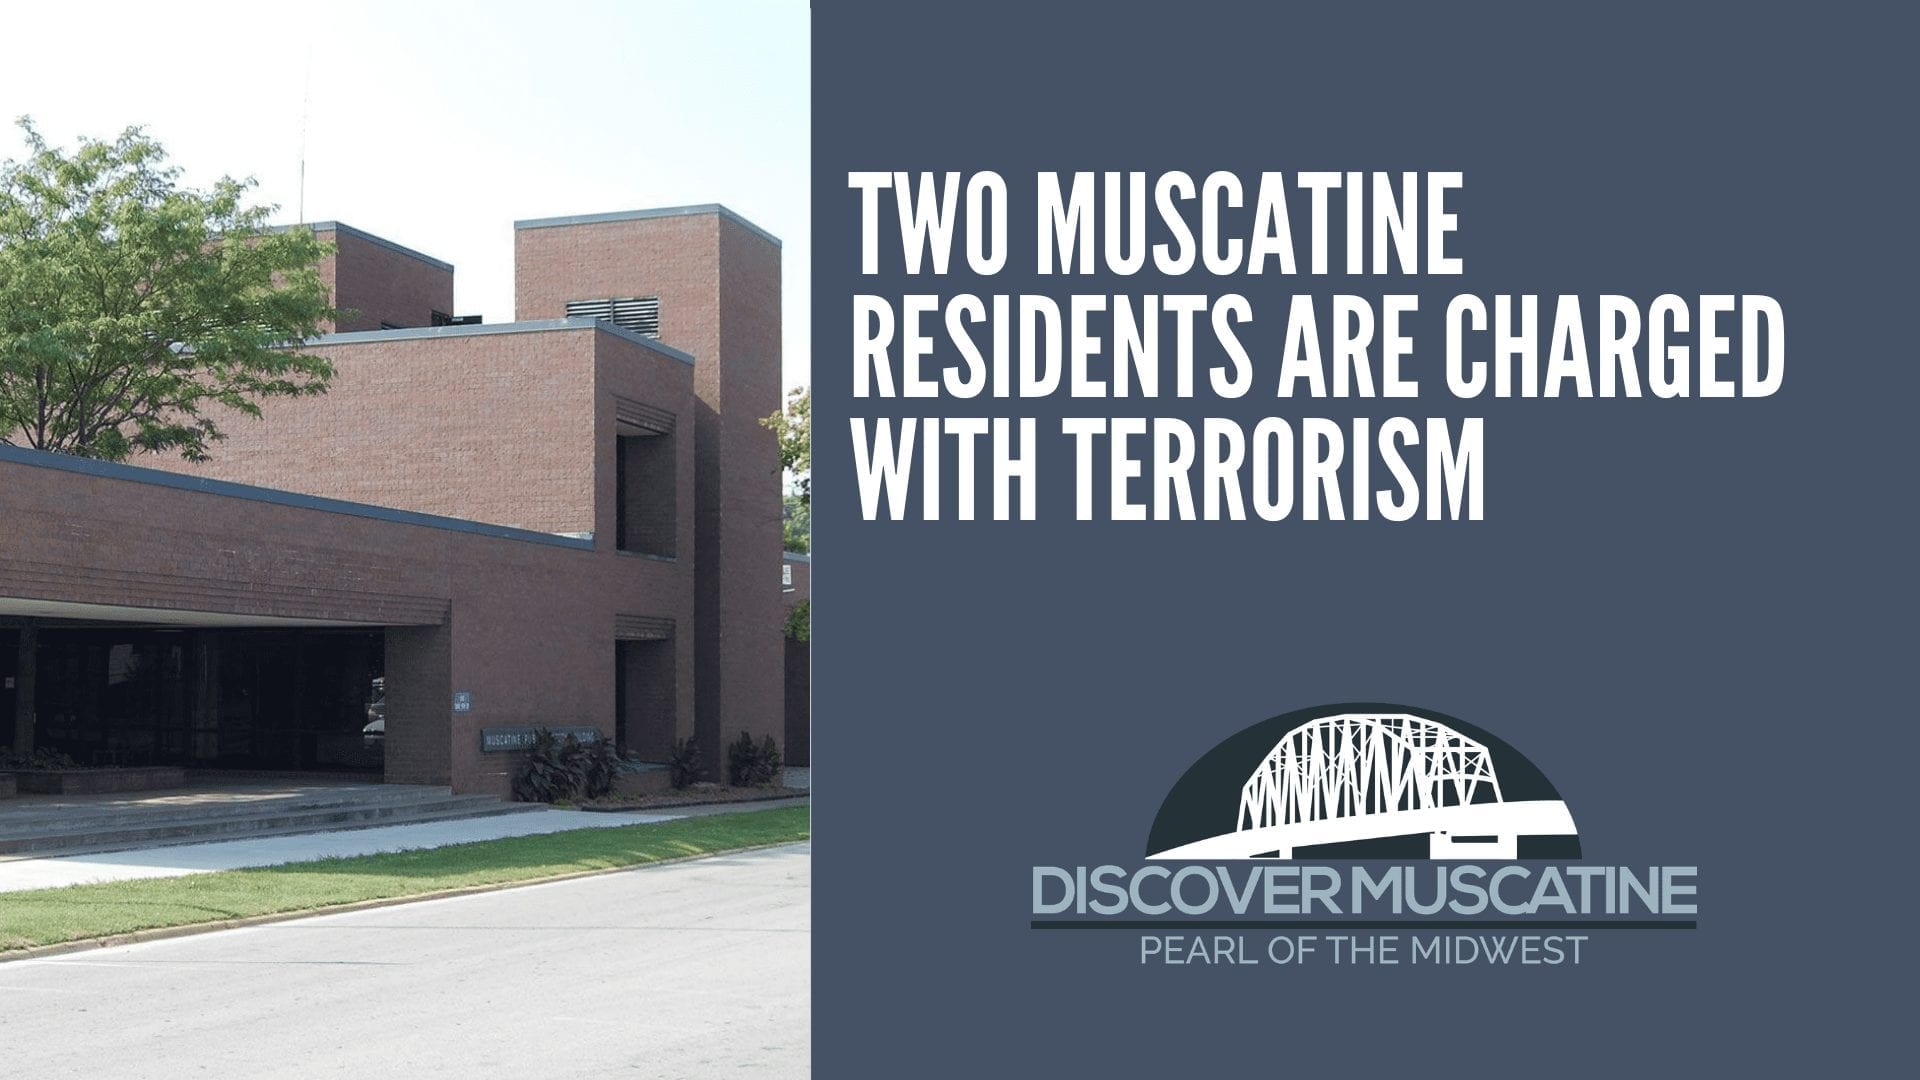 Two Muscatine residents are charged with terrorism